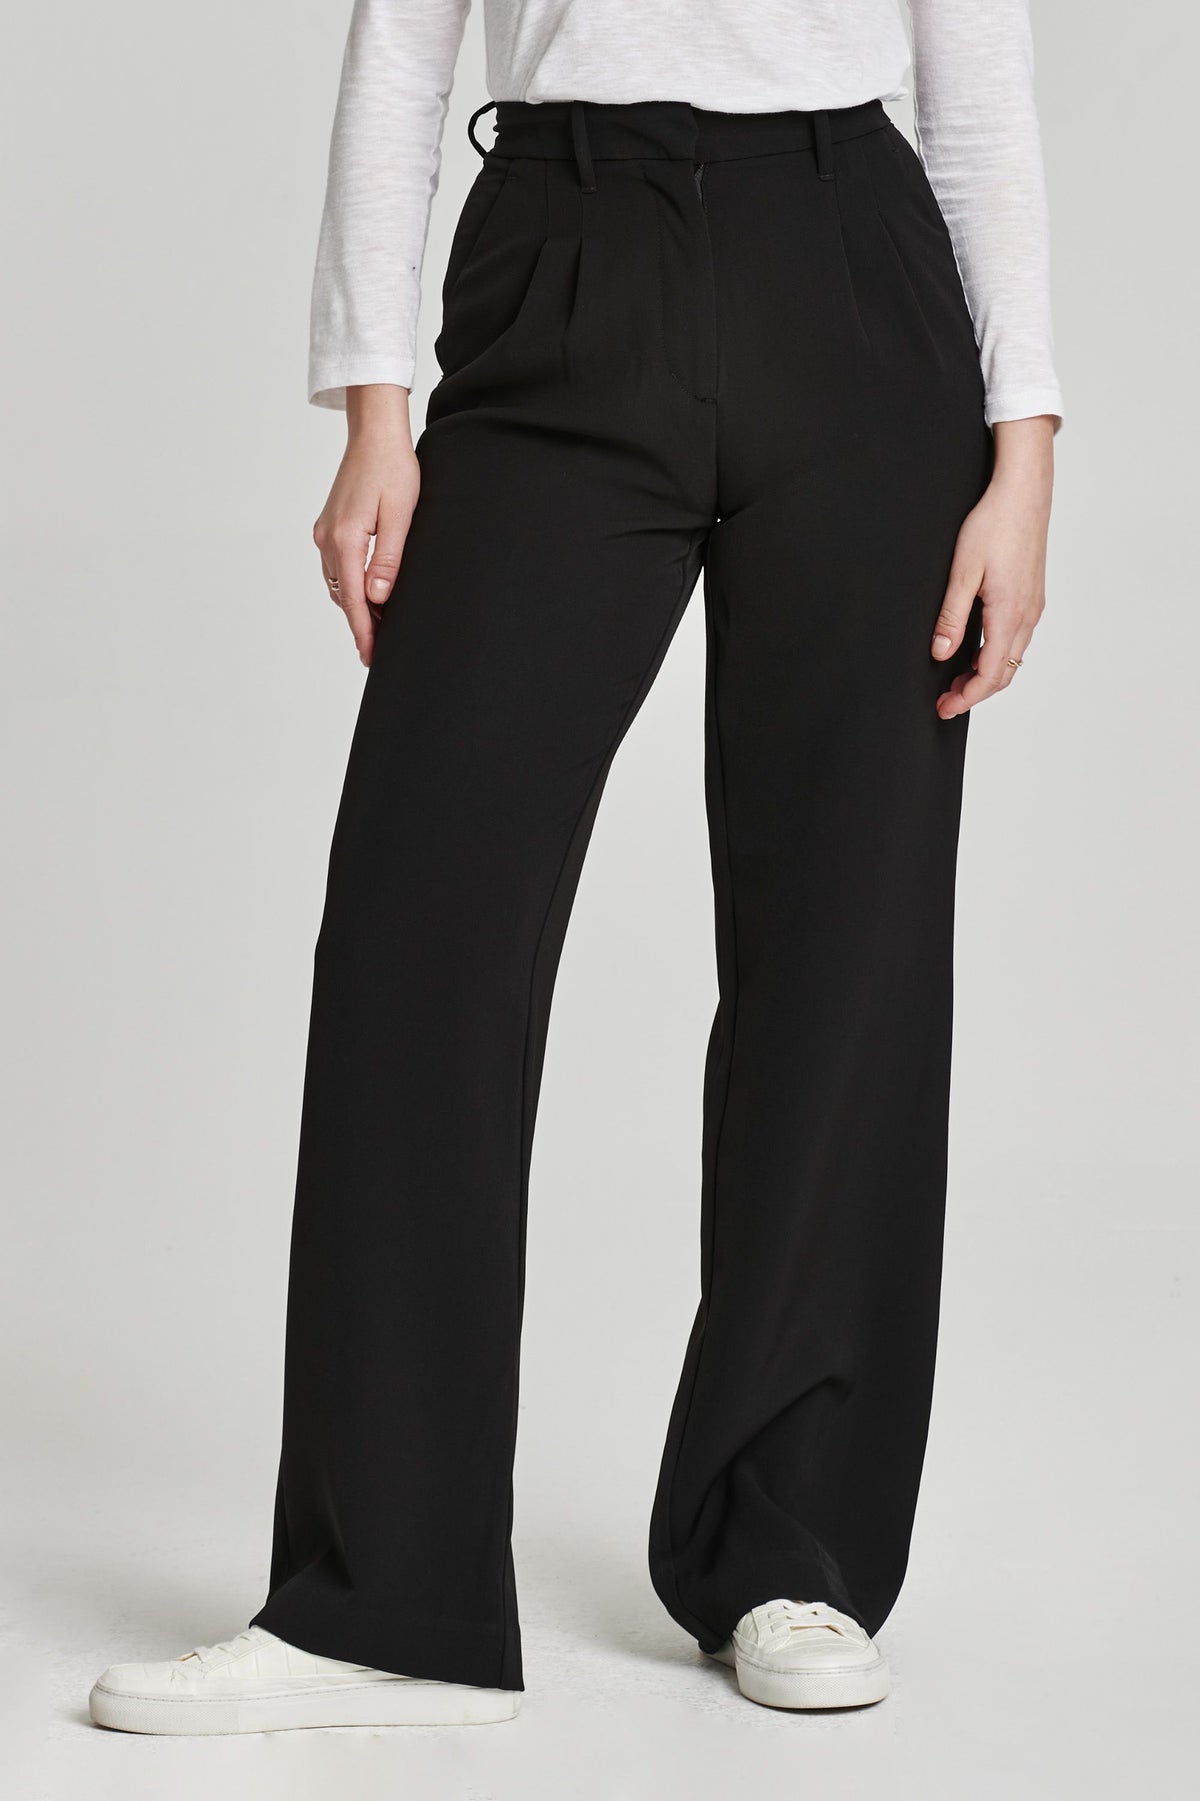 Another Love Adelaide Black Pant Pants - The Attic Boutique